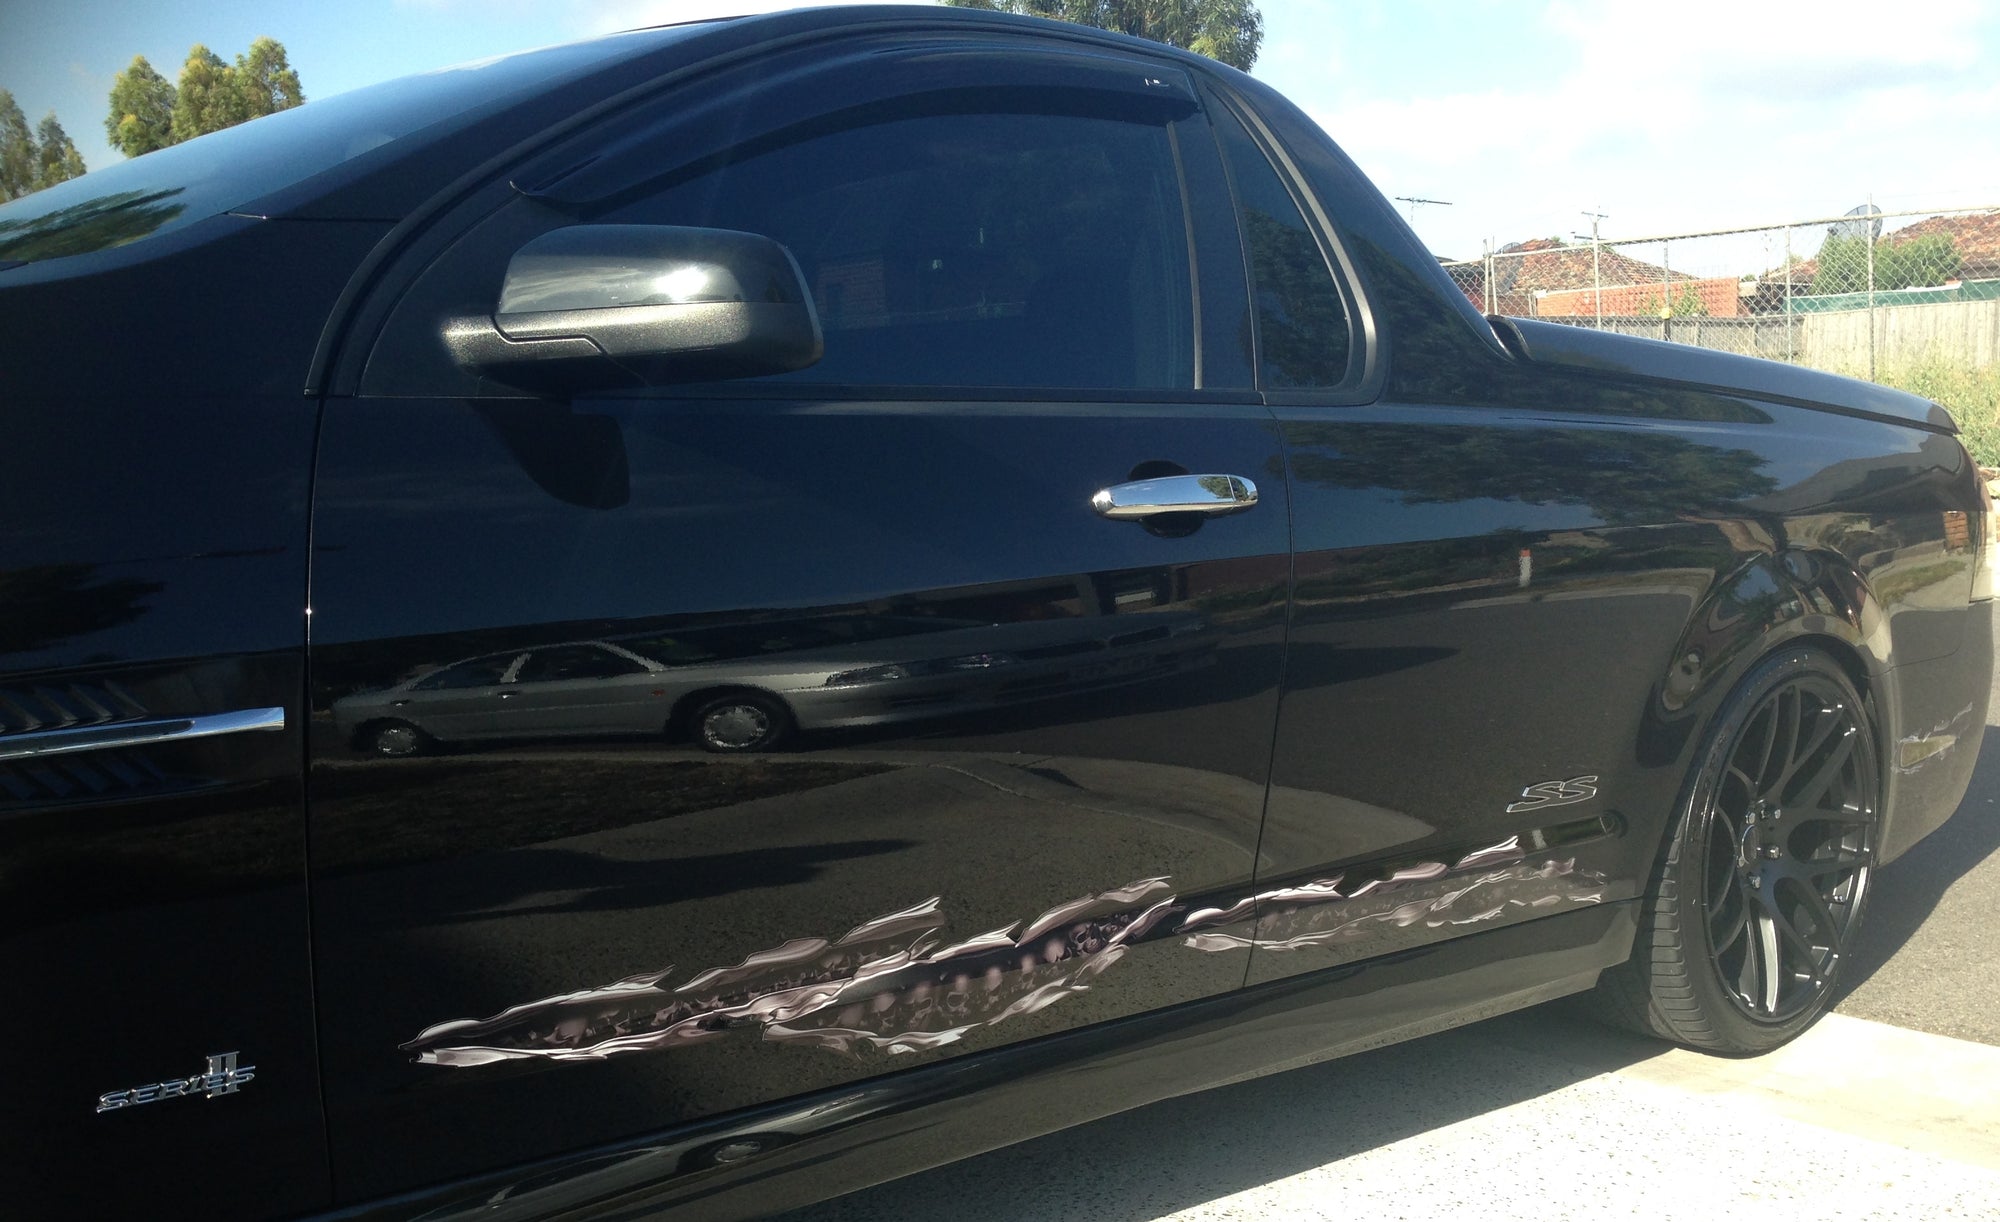 skulls tear decal of side of black Commodore utility vehicle